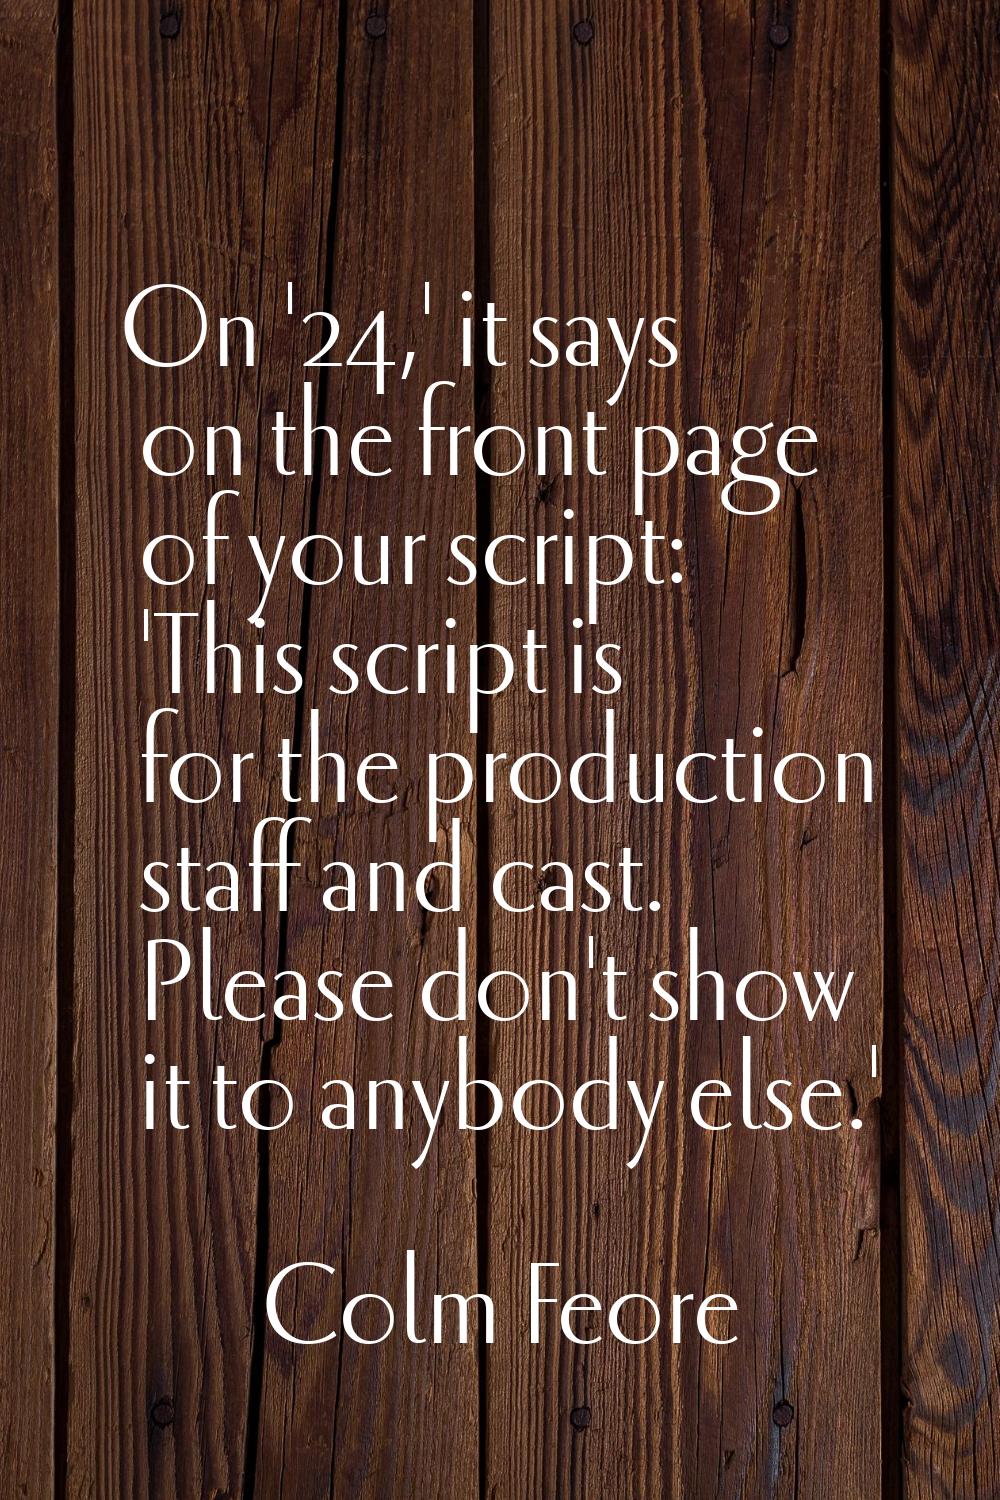 On '24,' it says on the front page of your script: 'This script is for the production staff and cas